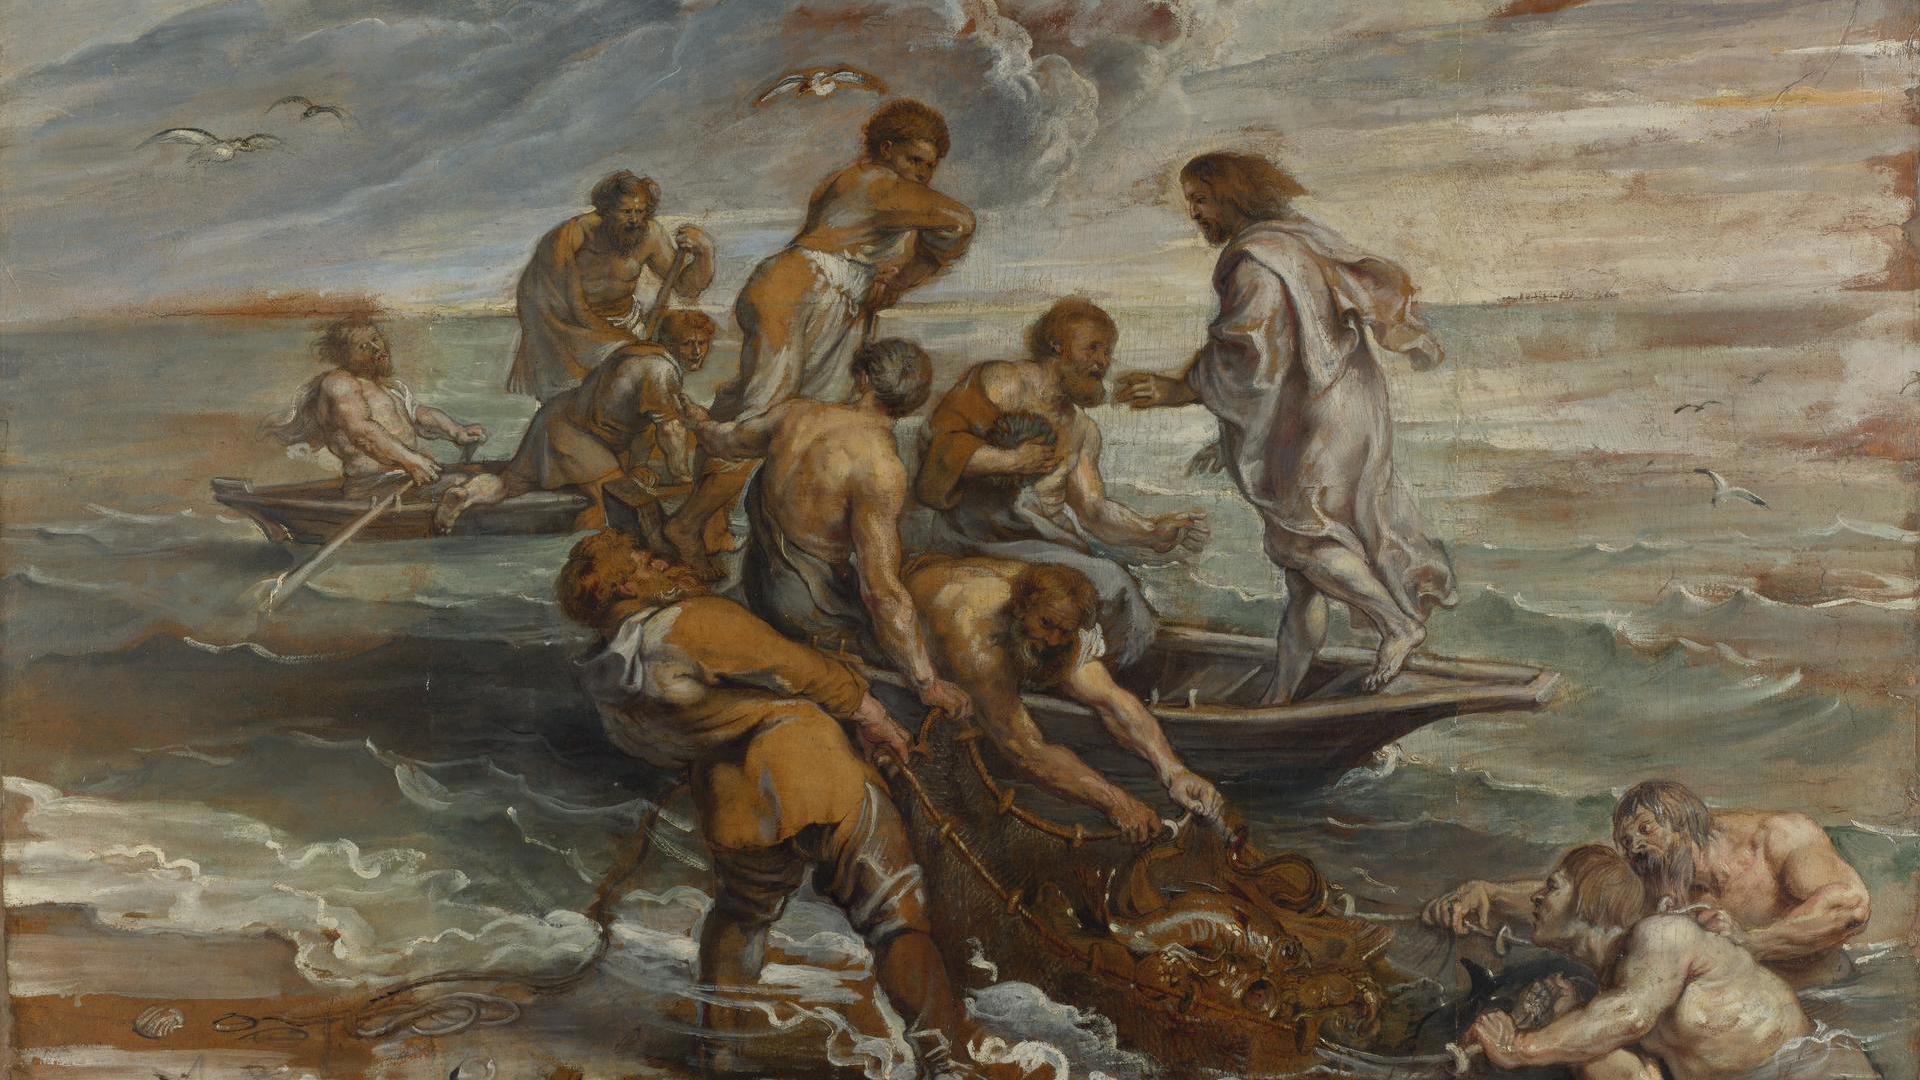 The Miraculous Draught of Fishes by Peter Paul Rubens